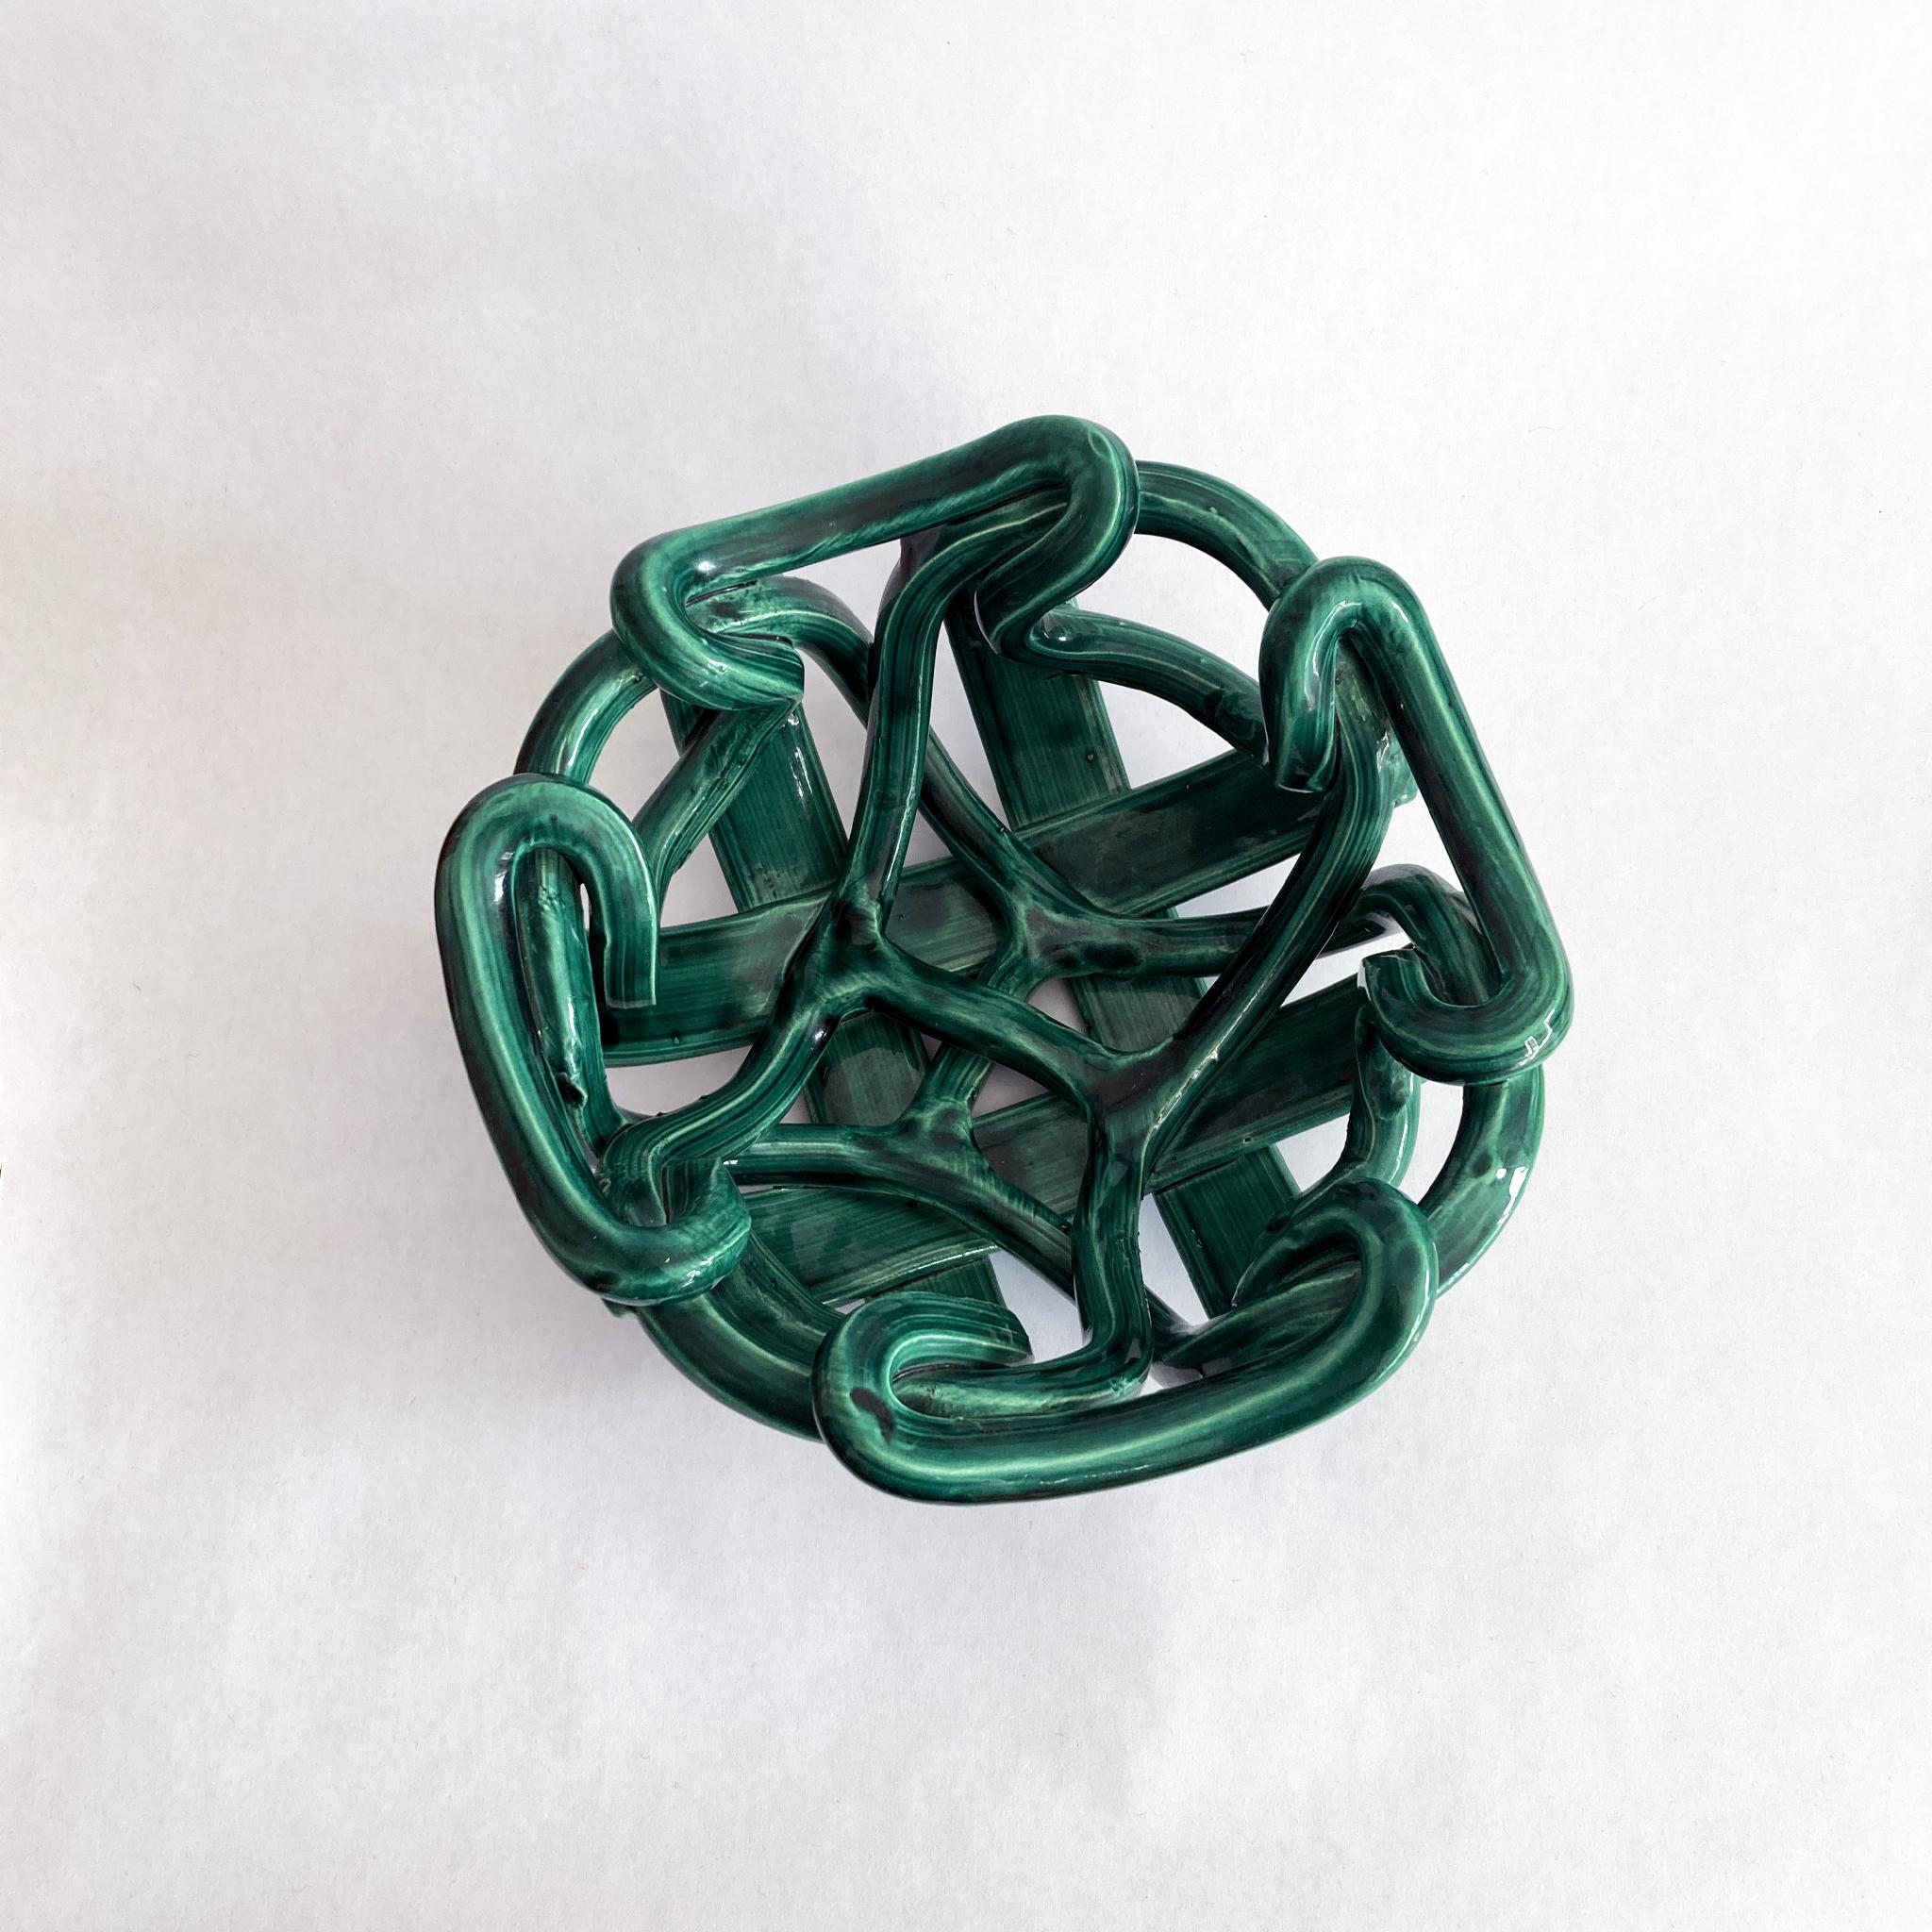 Unknown Midcentury Green Ceramic Braided Woven Abstract Centerpiece Bowl